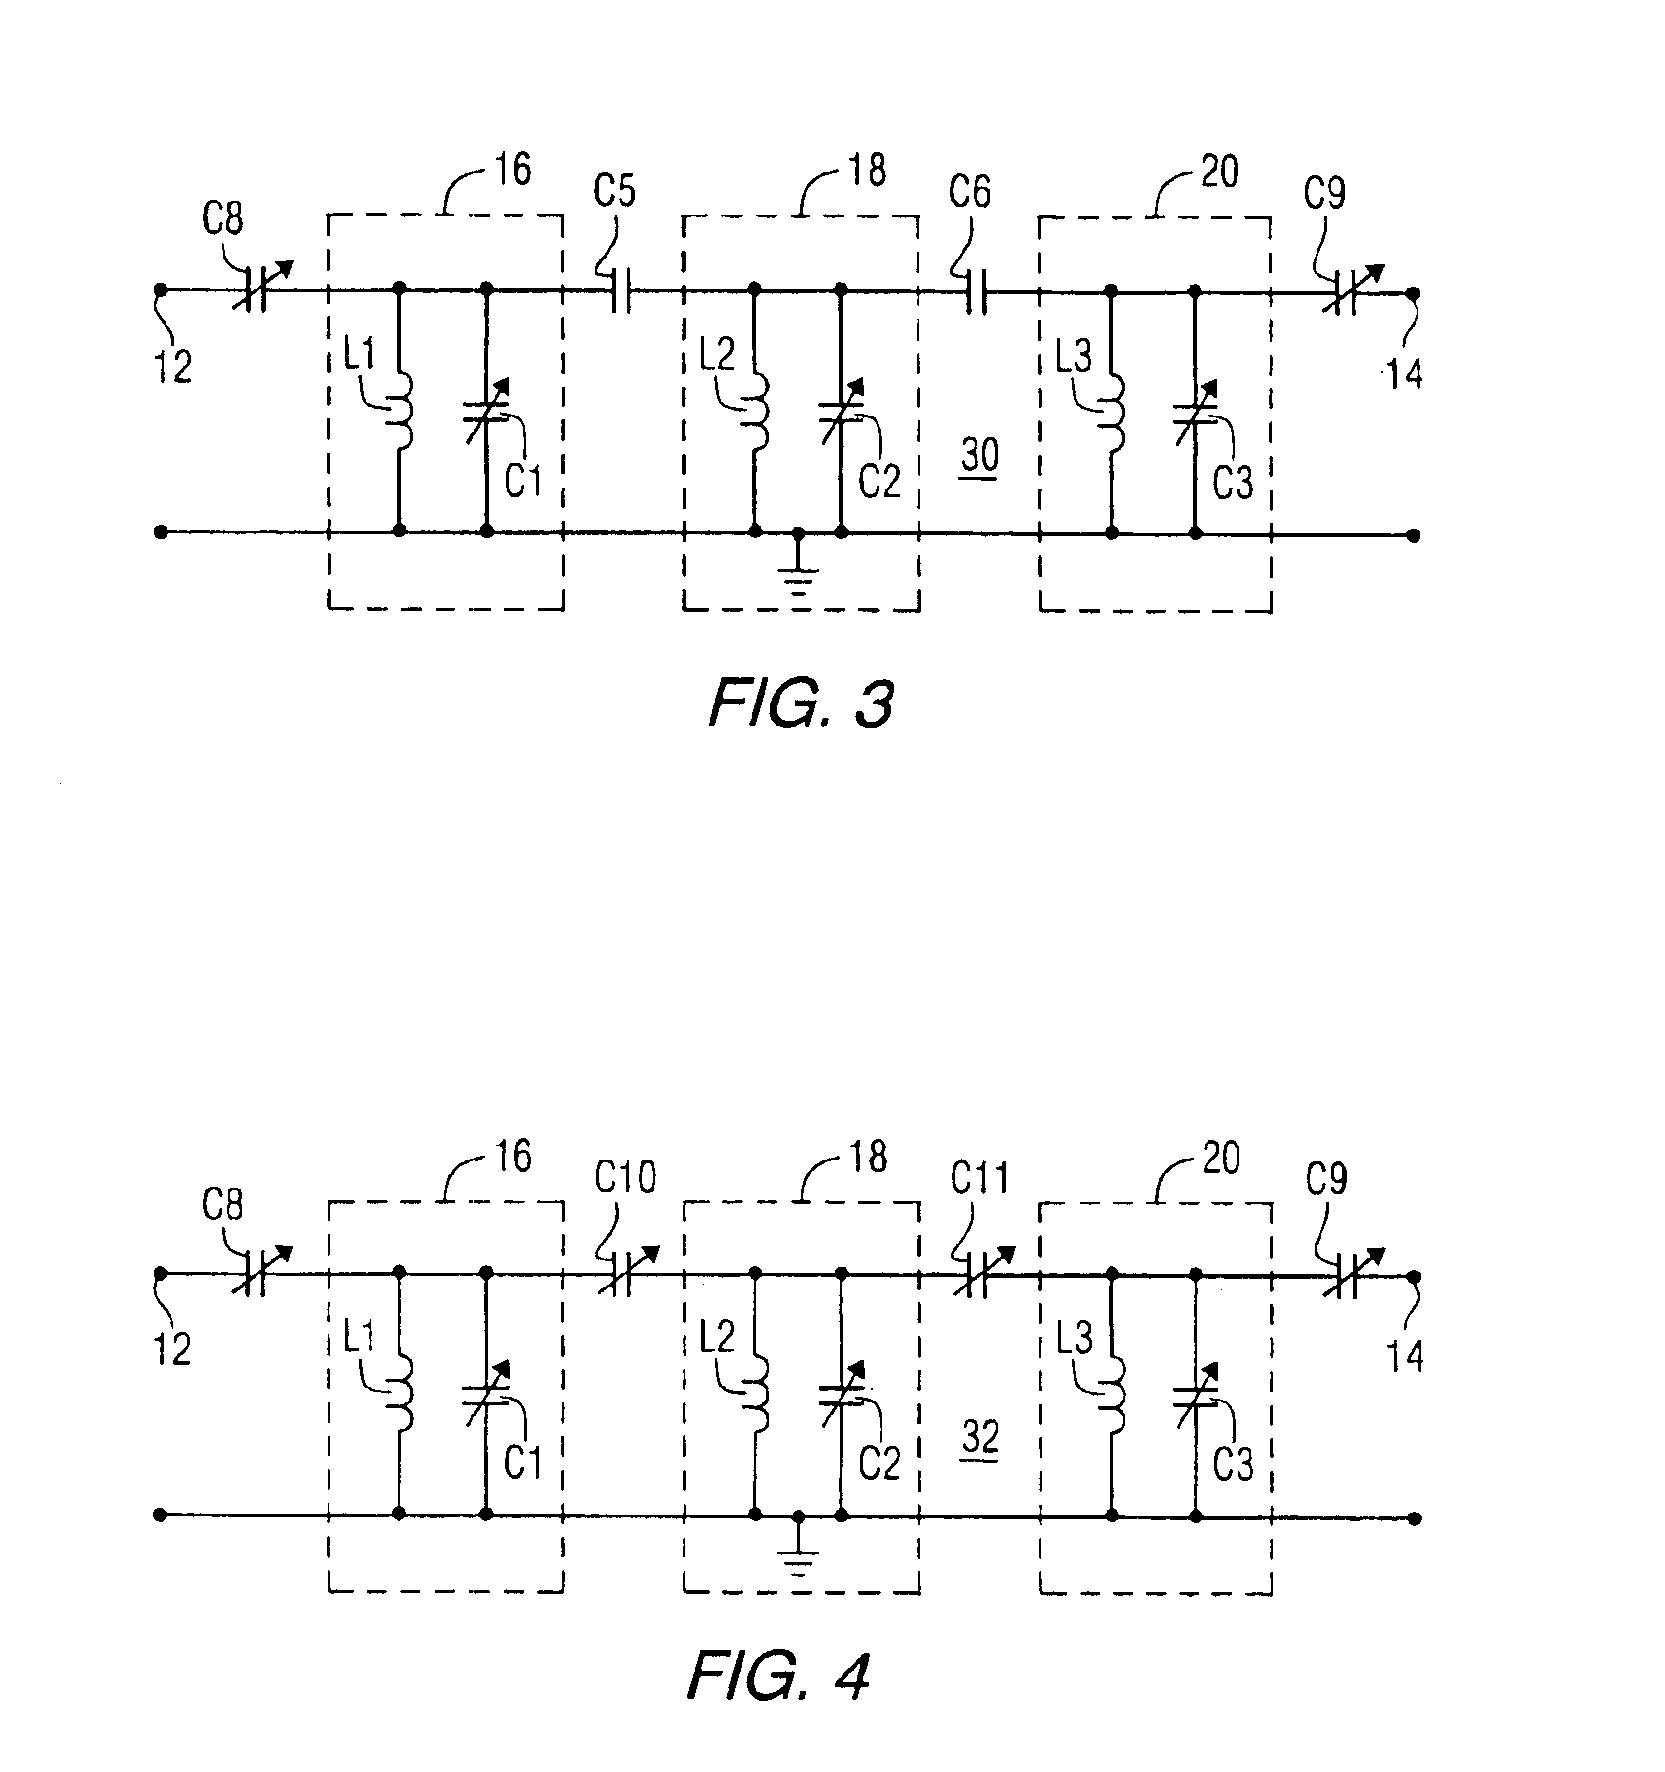 Electronic tunable filters with dielectric varactors